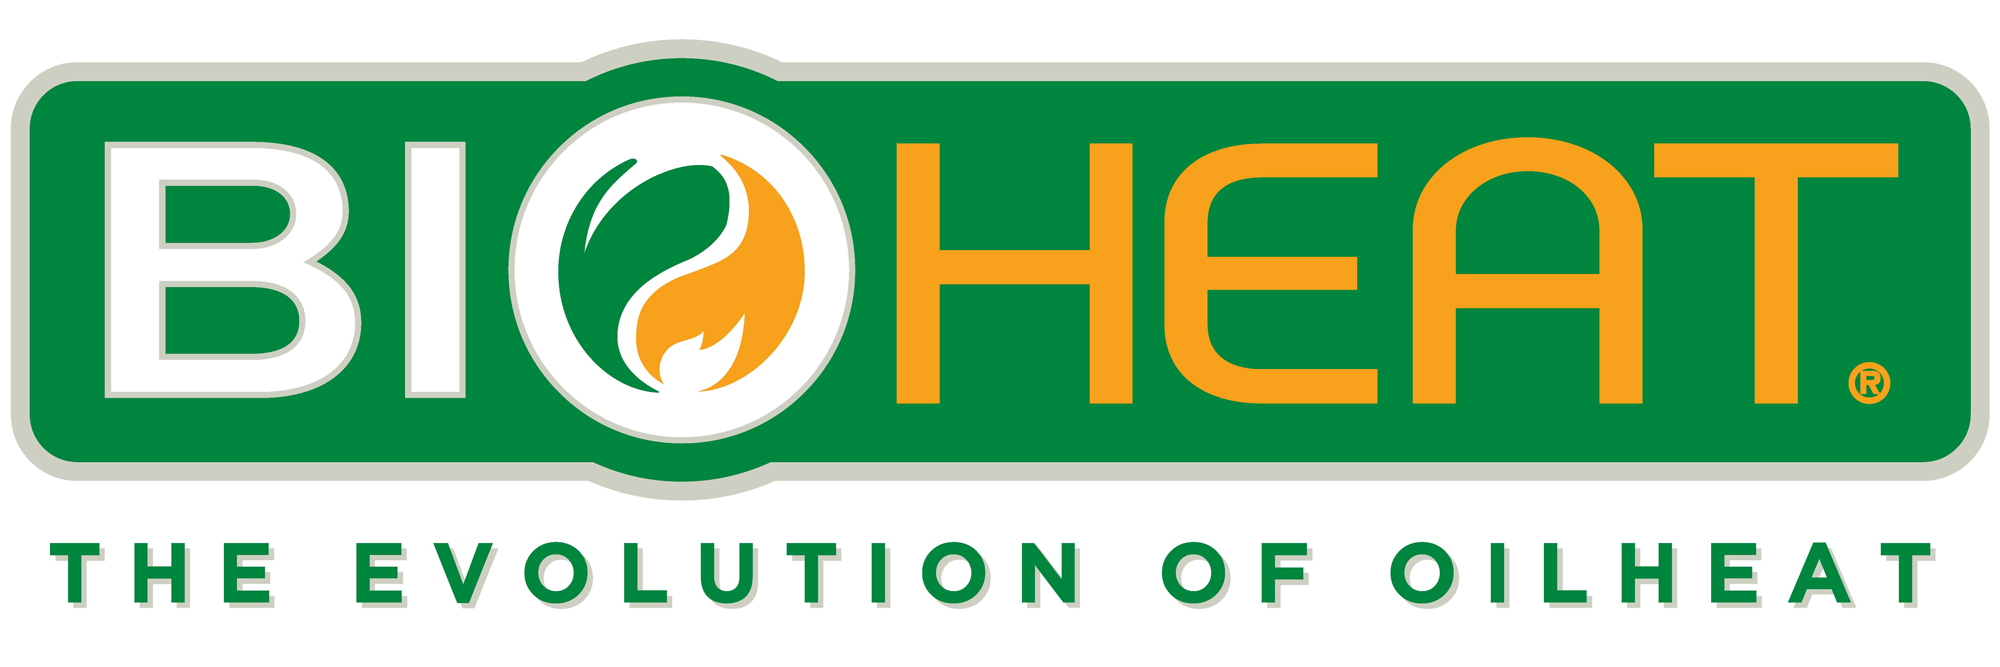 Genove Oil & Air Delivers Bioheat; “The Evolution of Oil Heat” BioHeat is domestically produced. Soy-based Bioheat can literally be grown at home; therefore supporting our nation’s farmers and reducing our dependence on foreign oil.